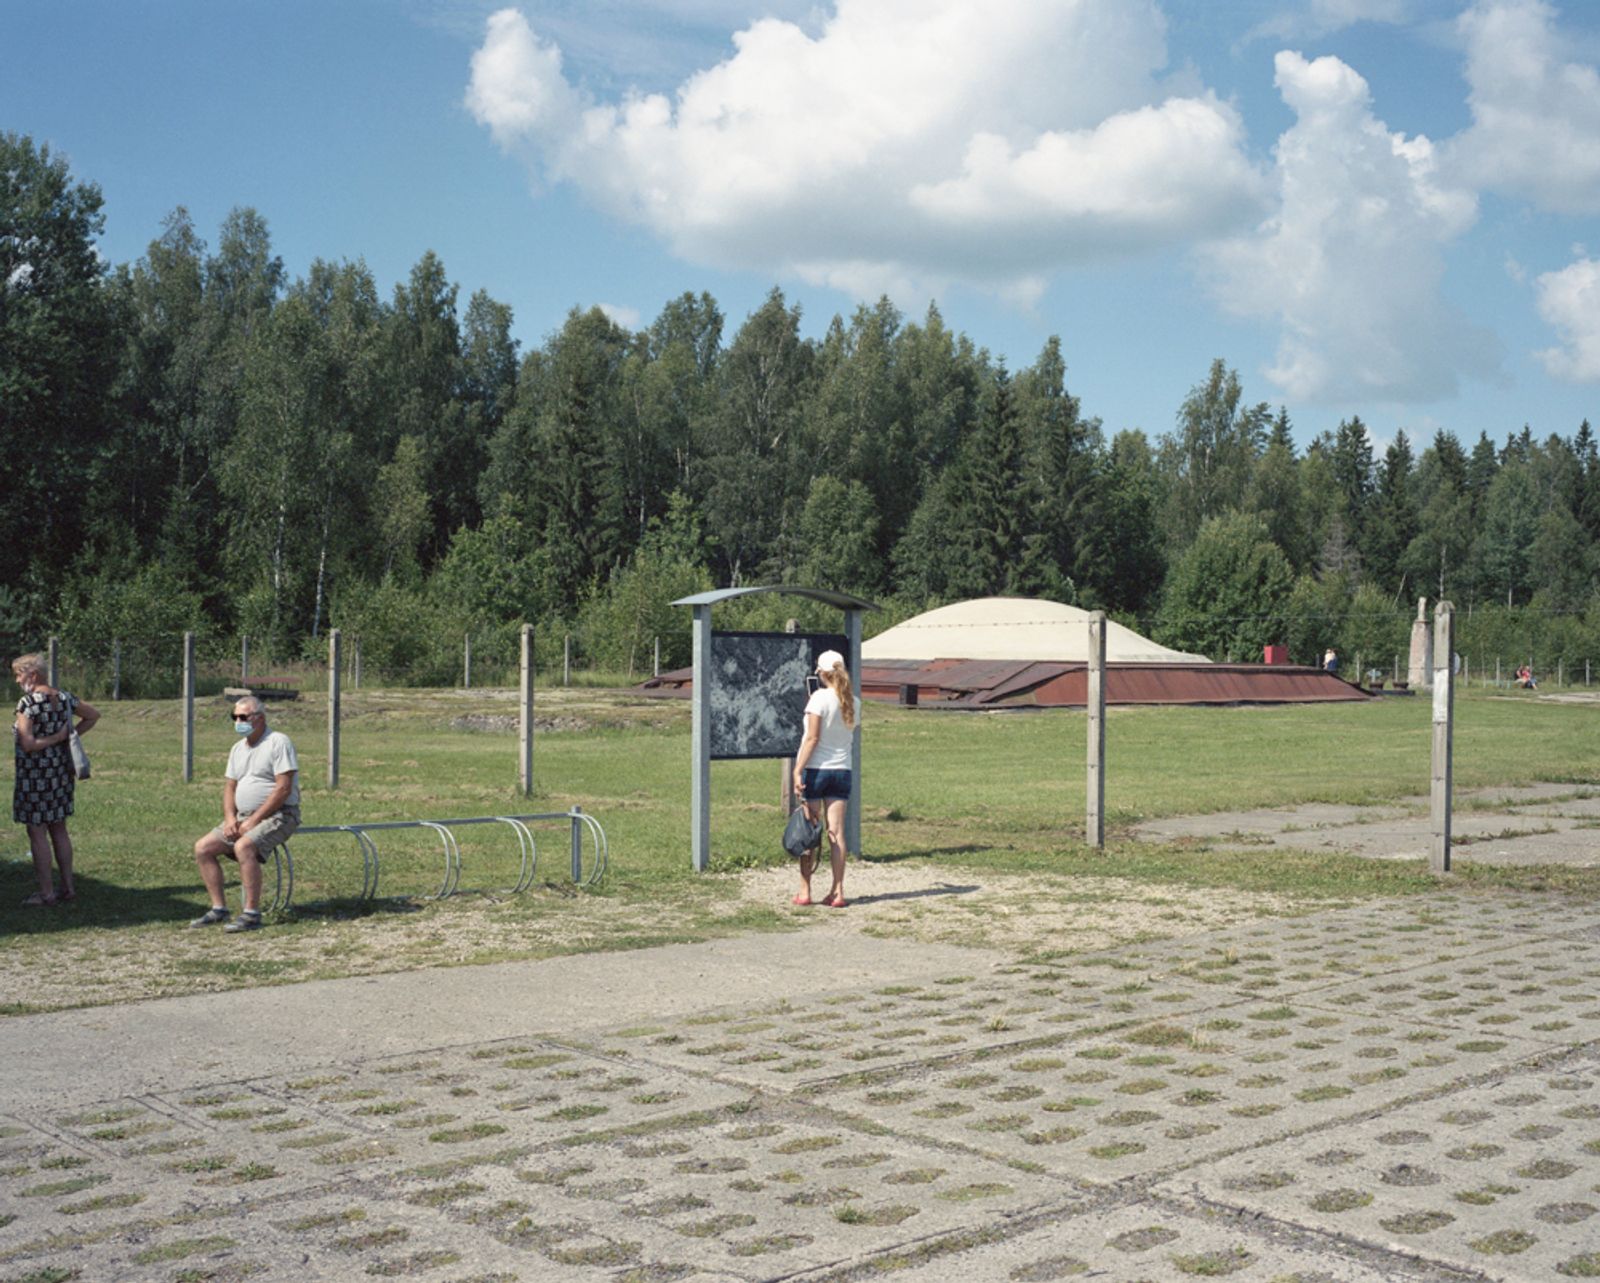 © Tommaso Rada - Image from the Domestic Borders of Europe photography project